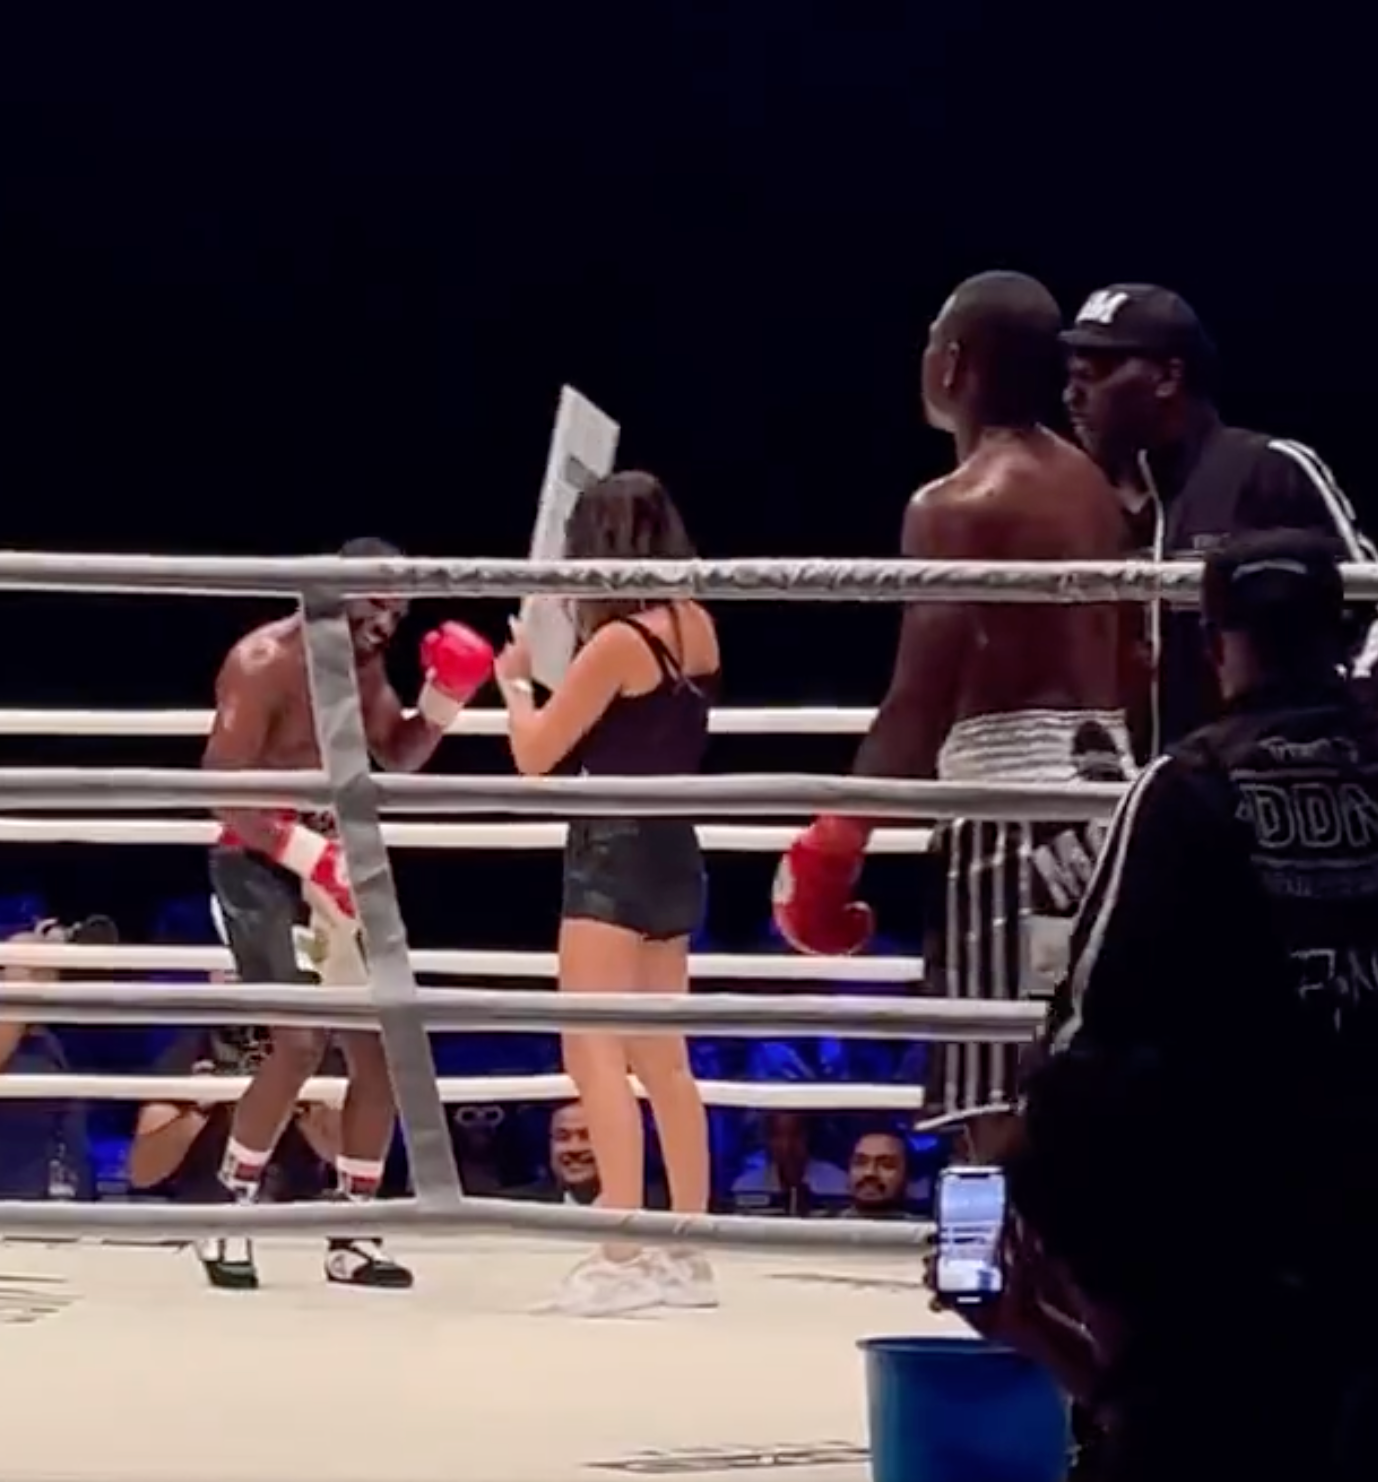 Mayweather dancing with a ring girl